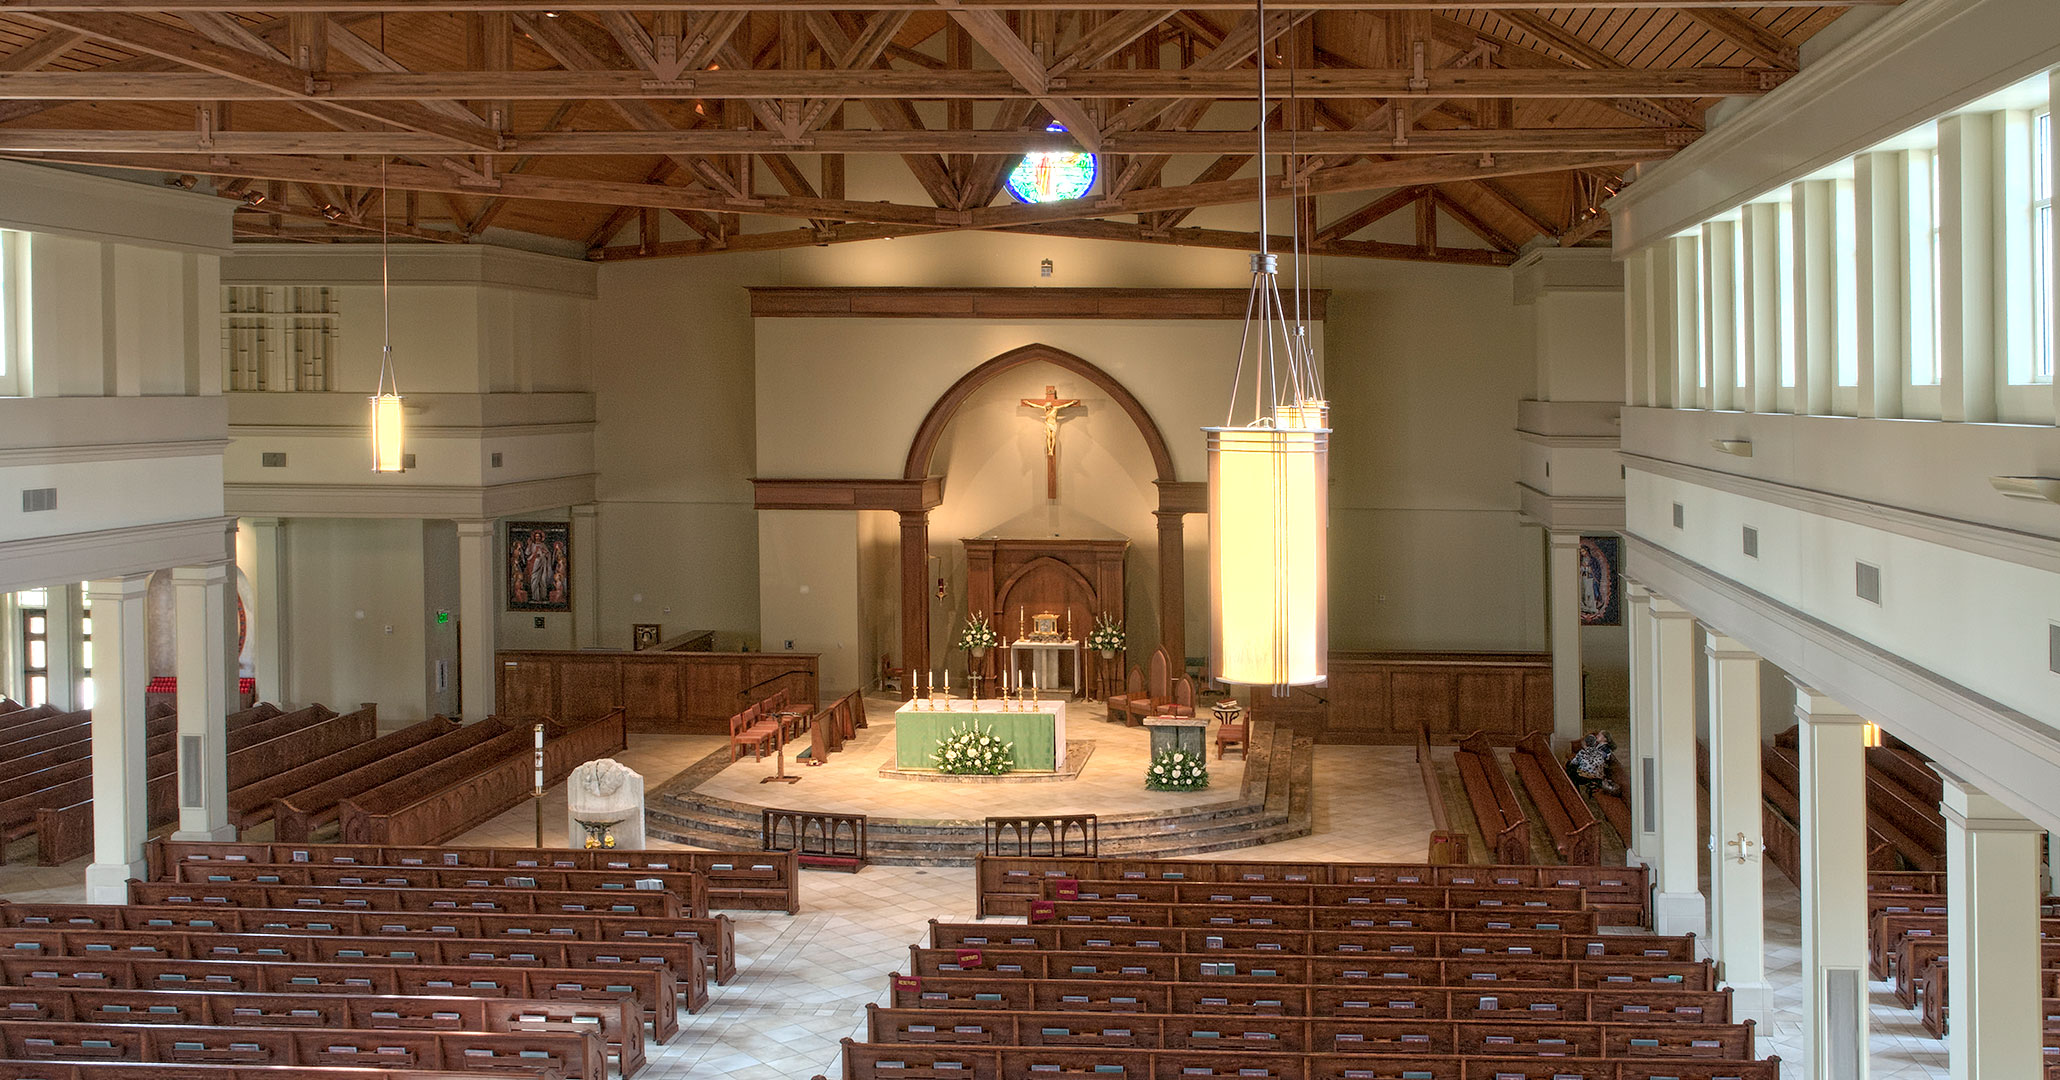 Boudreaux architects worked with St. Mark Catholic Church to create a rich interior.